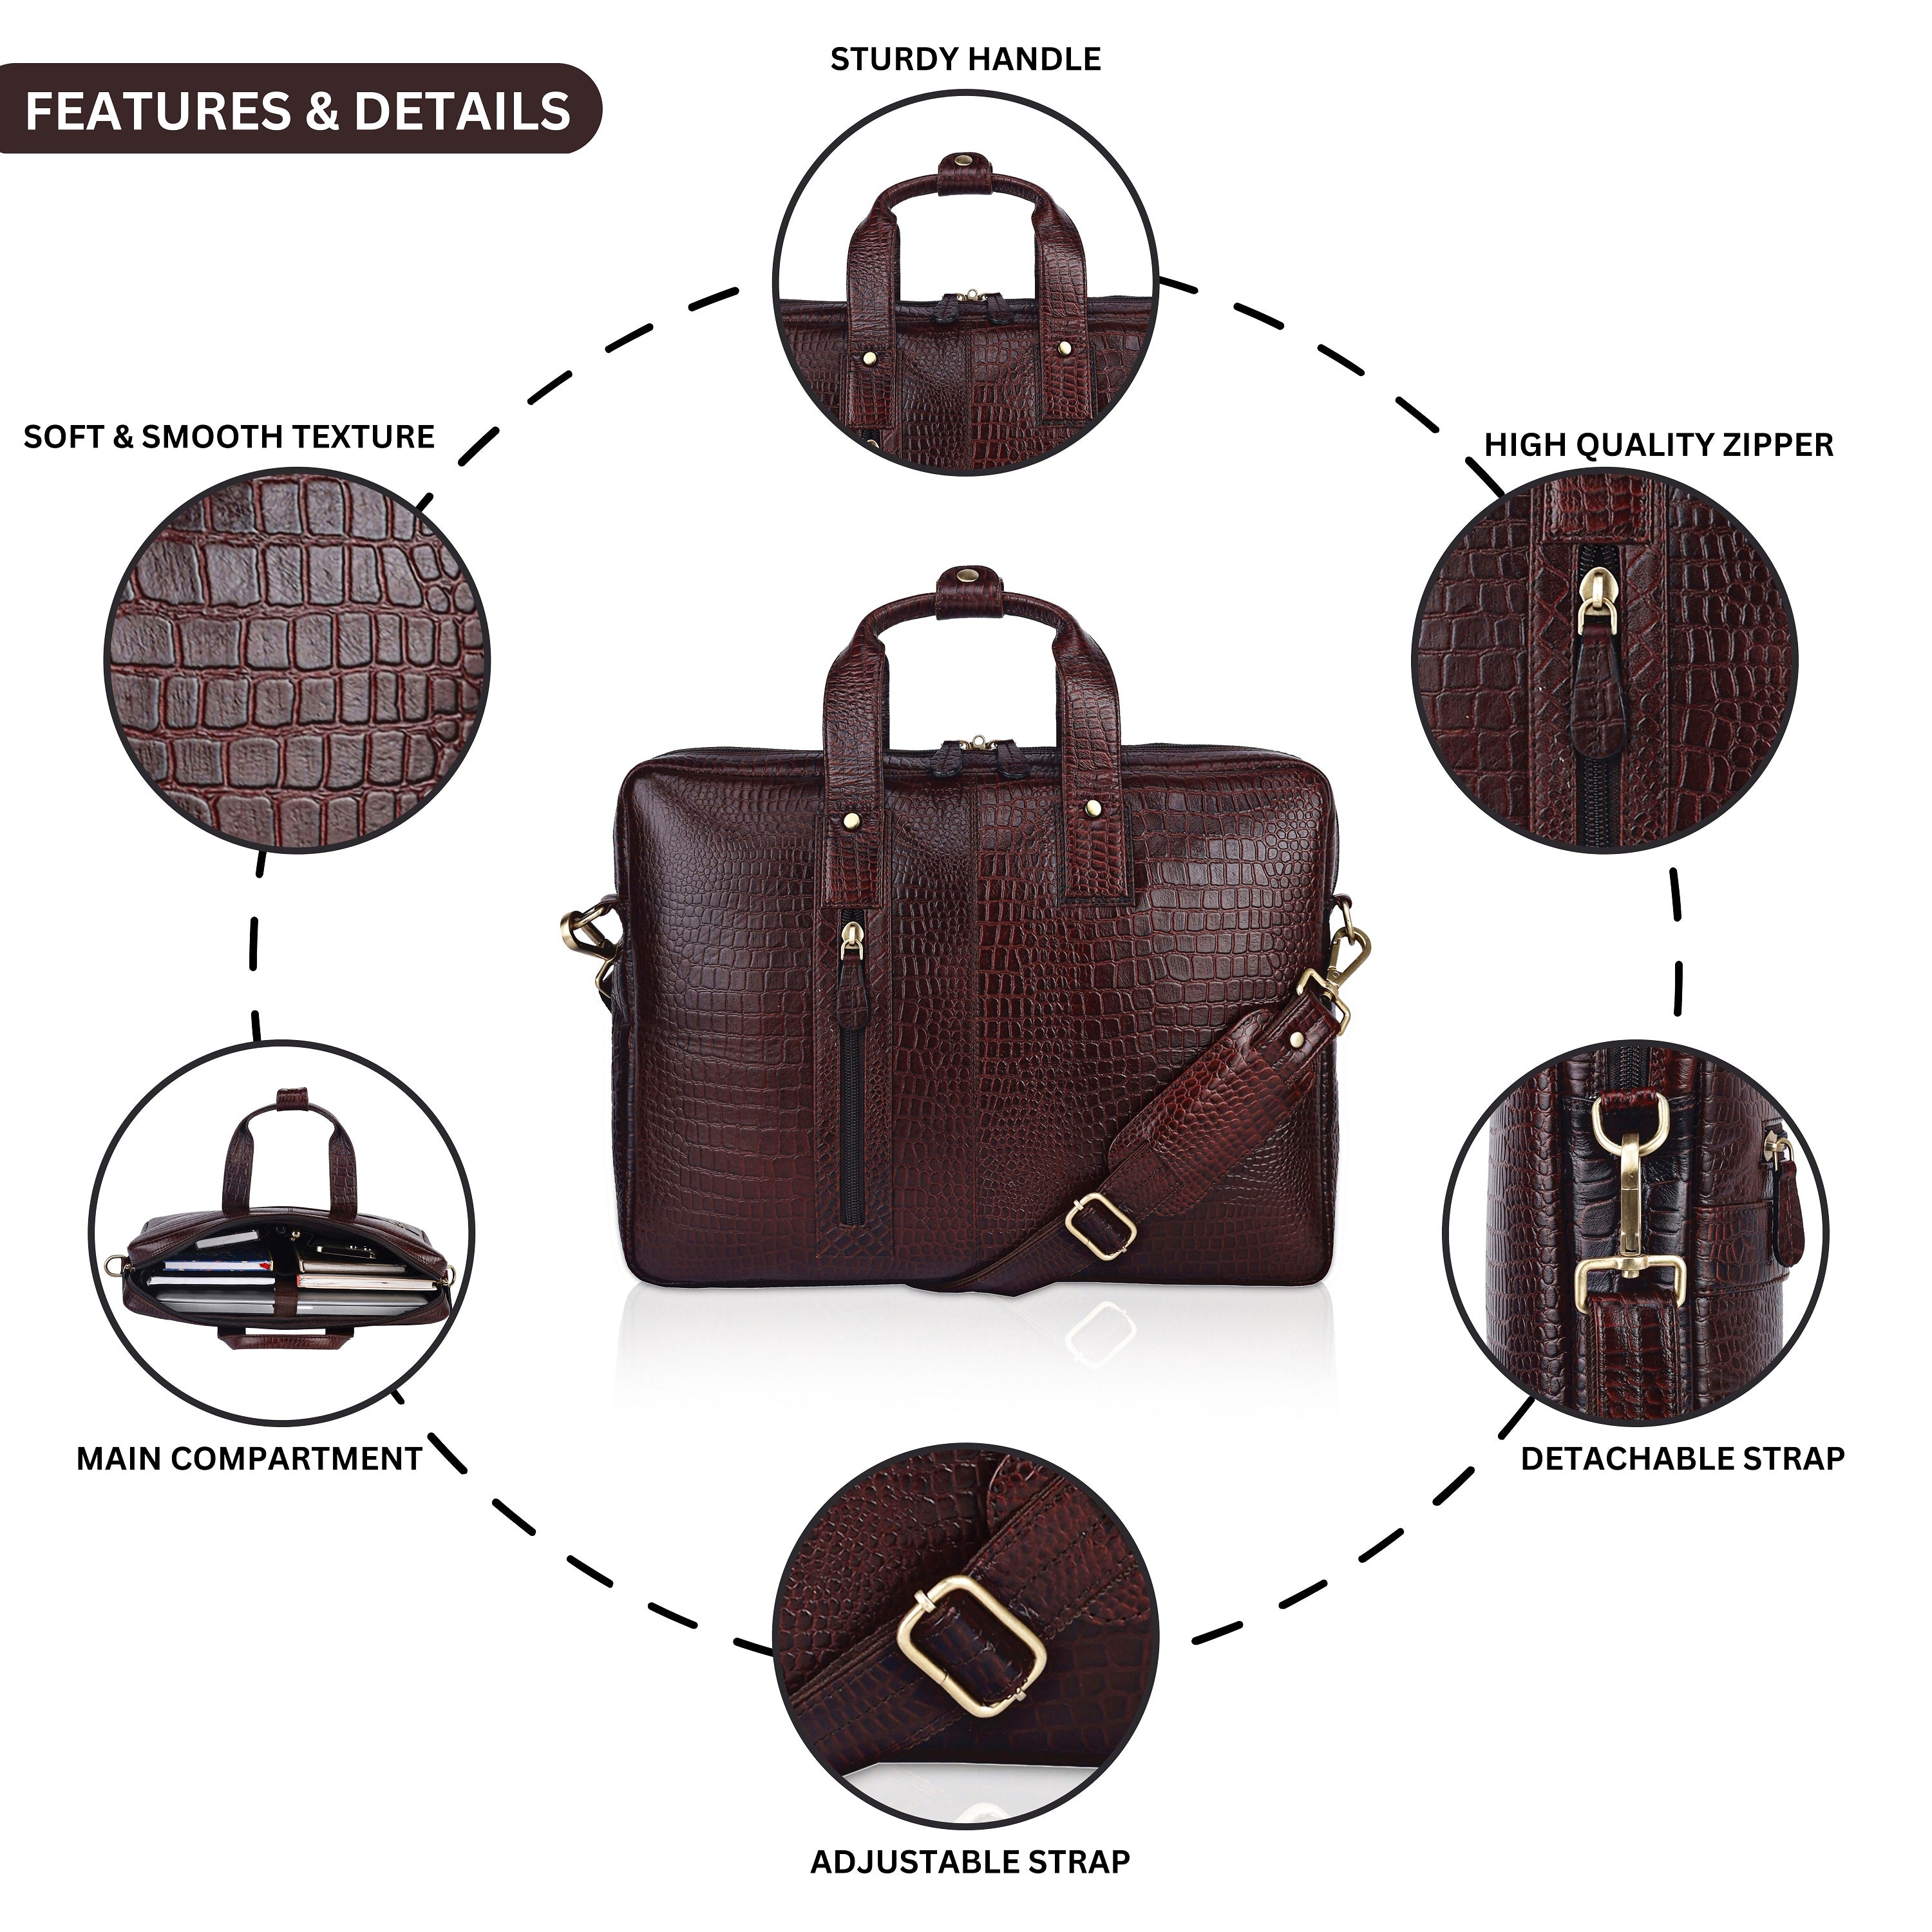 Genuine Leather Laptop Messenger Bags for Men and Women Brown Croco SkinOutfit